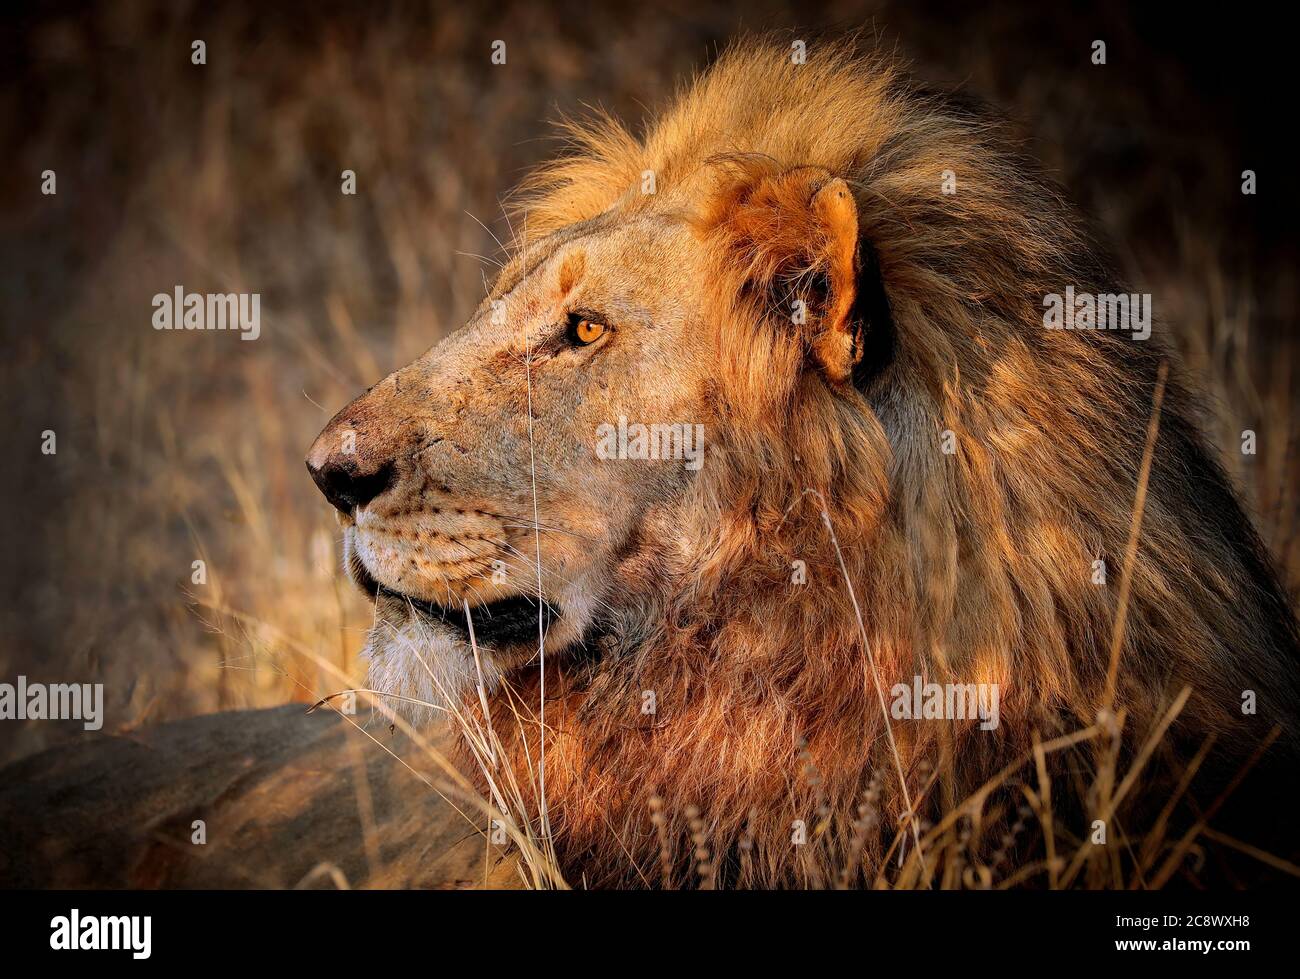 Lion in the warm light of the day, South Africa Stock Photo